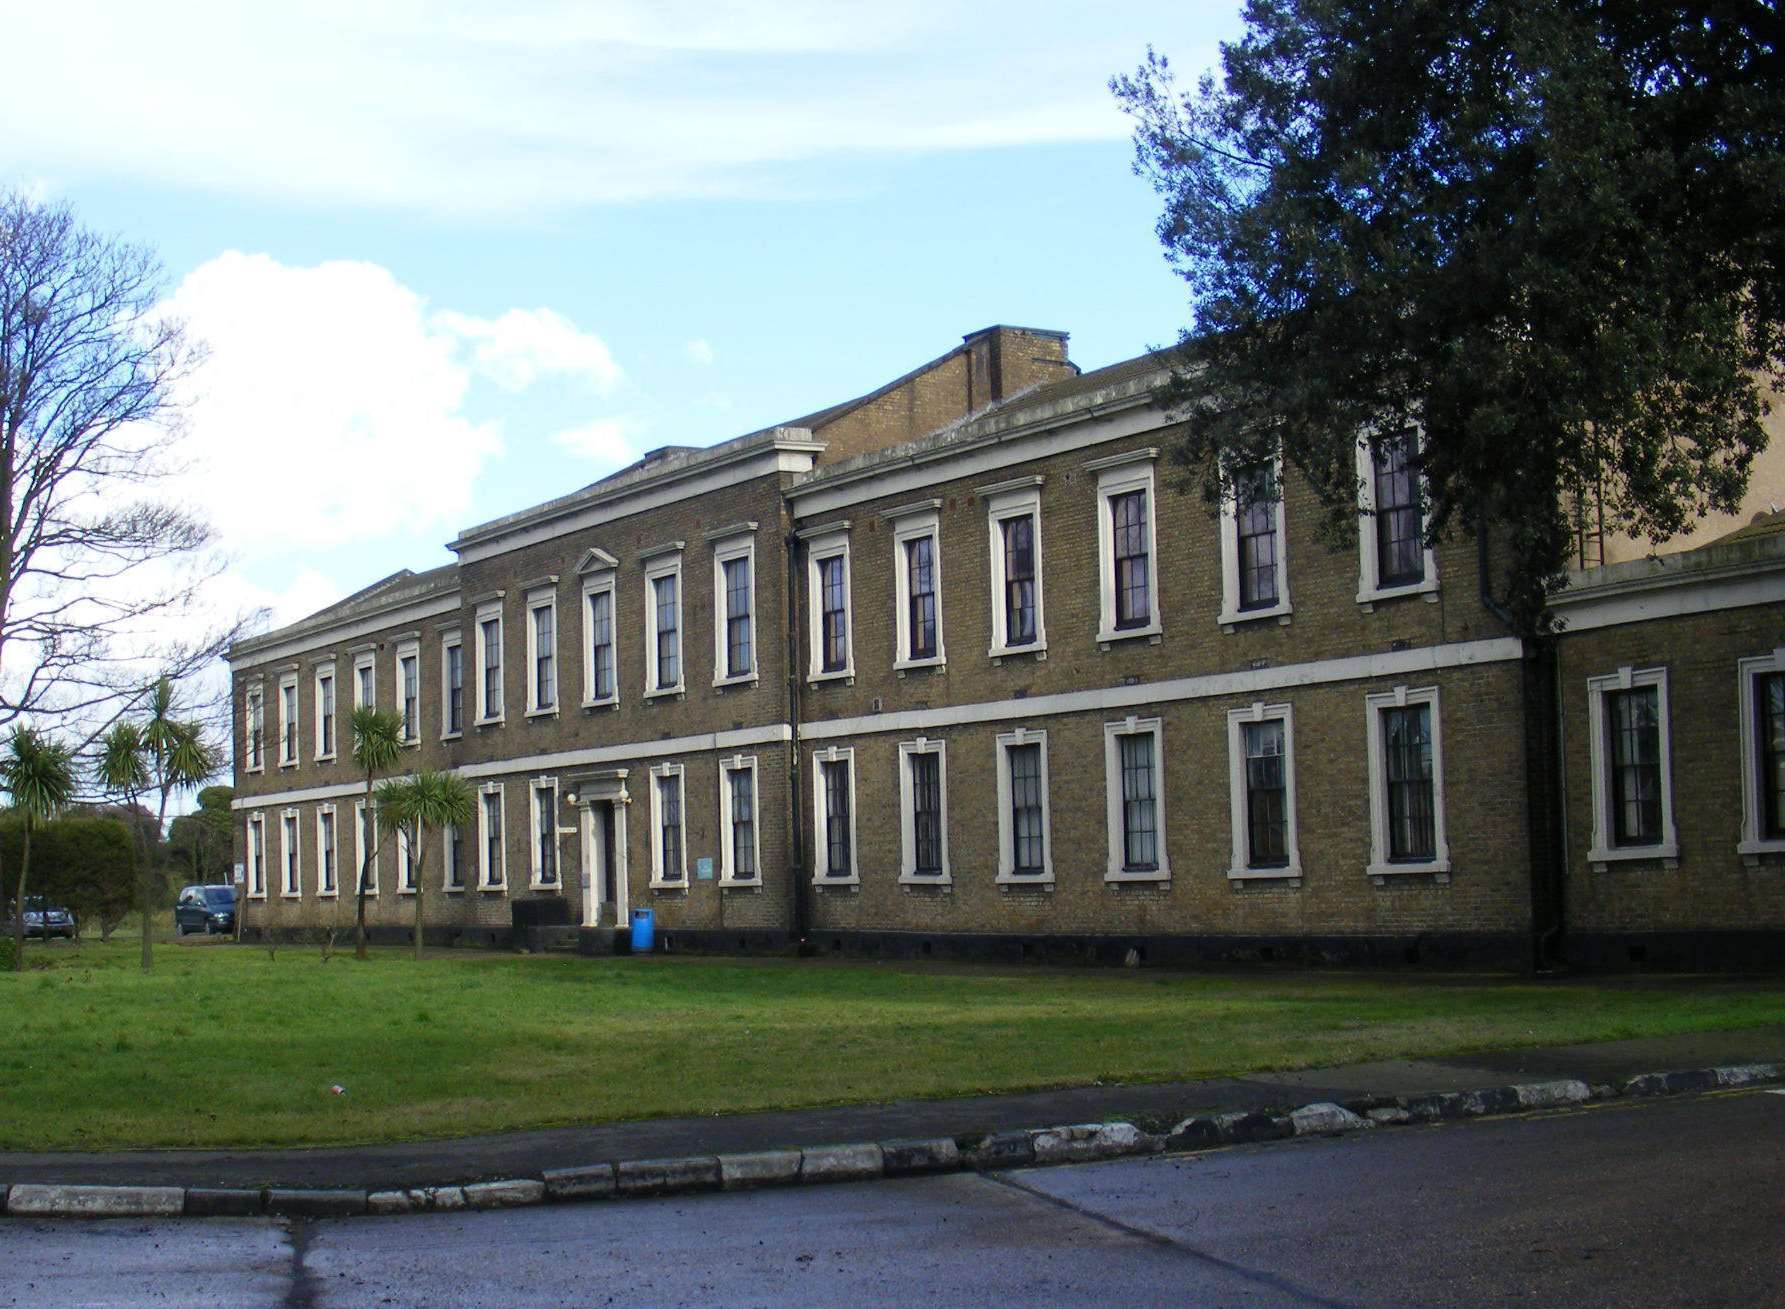 The historic former Sheerness military hospital